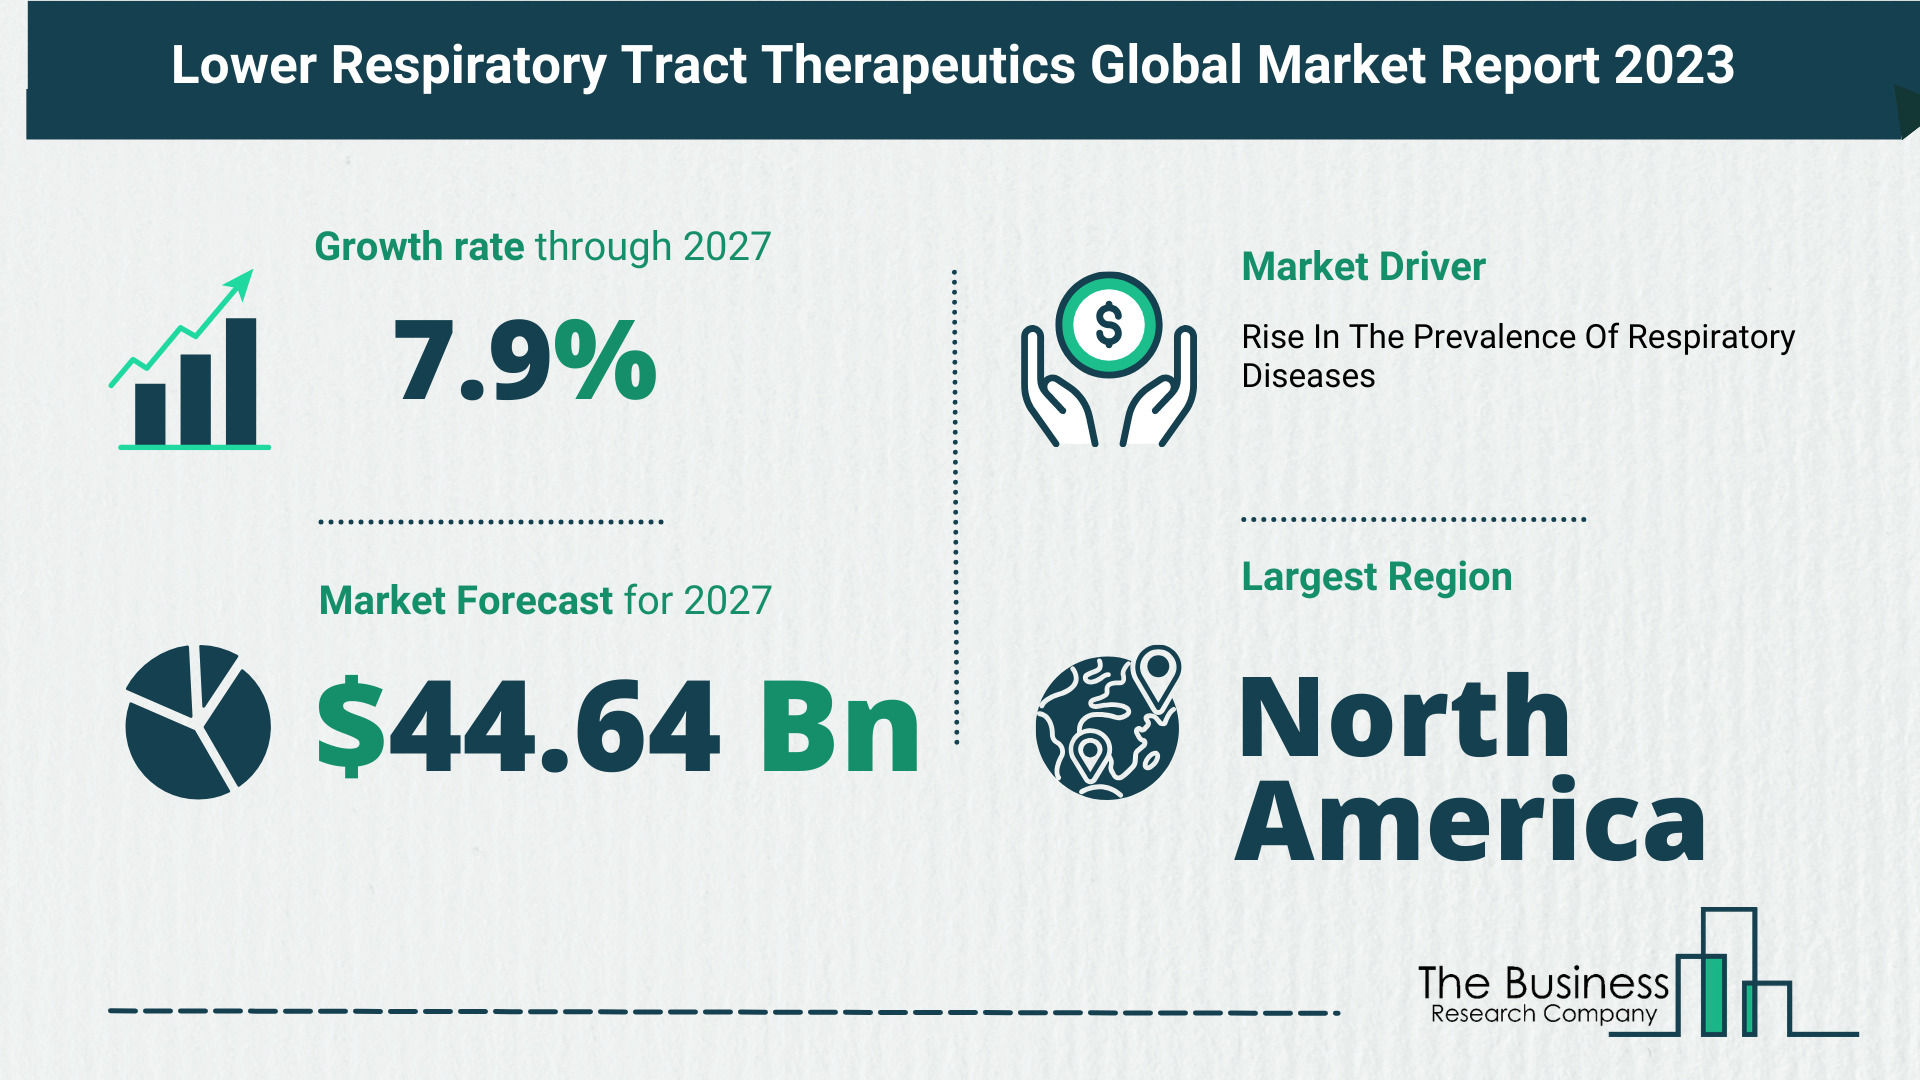 Key Trends And Drivers In The Respiratory Syncytial Virus (RSV) Therapeutics Market 2023